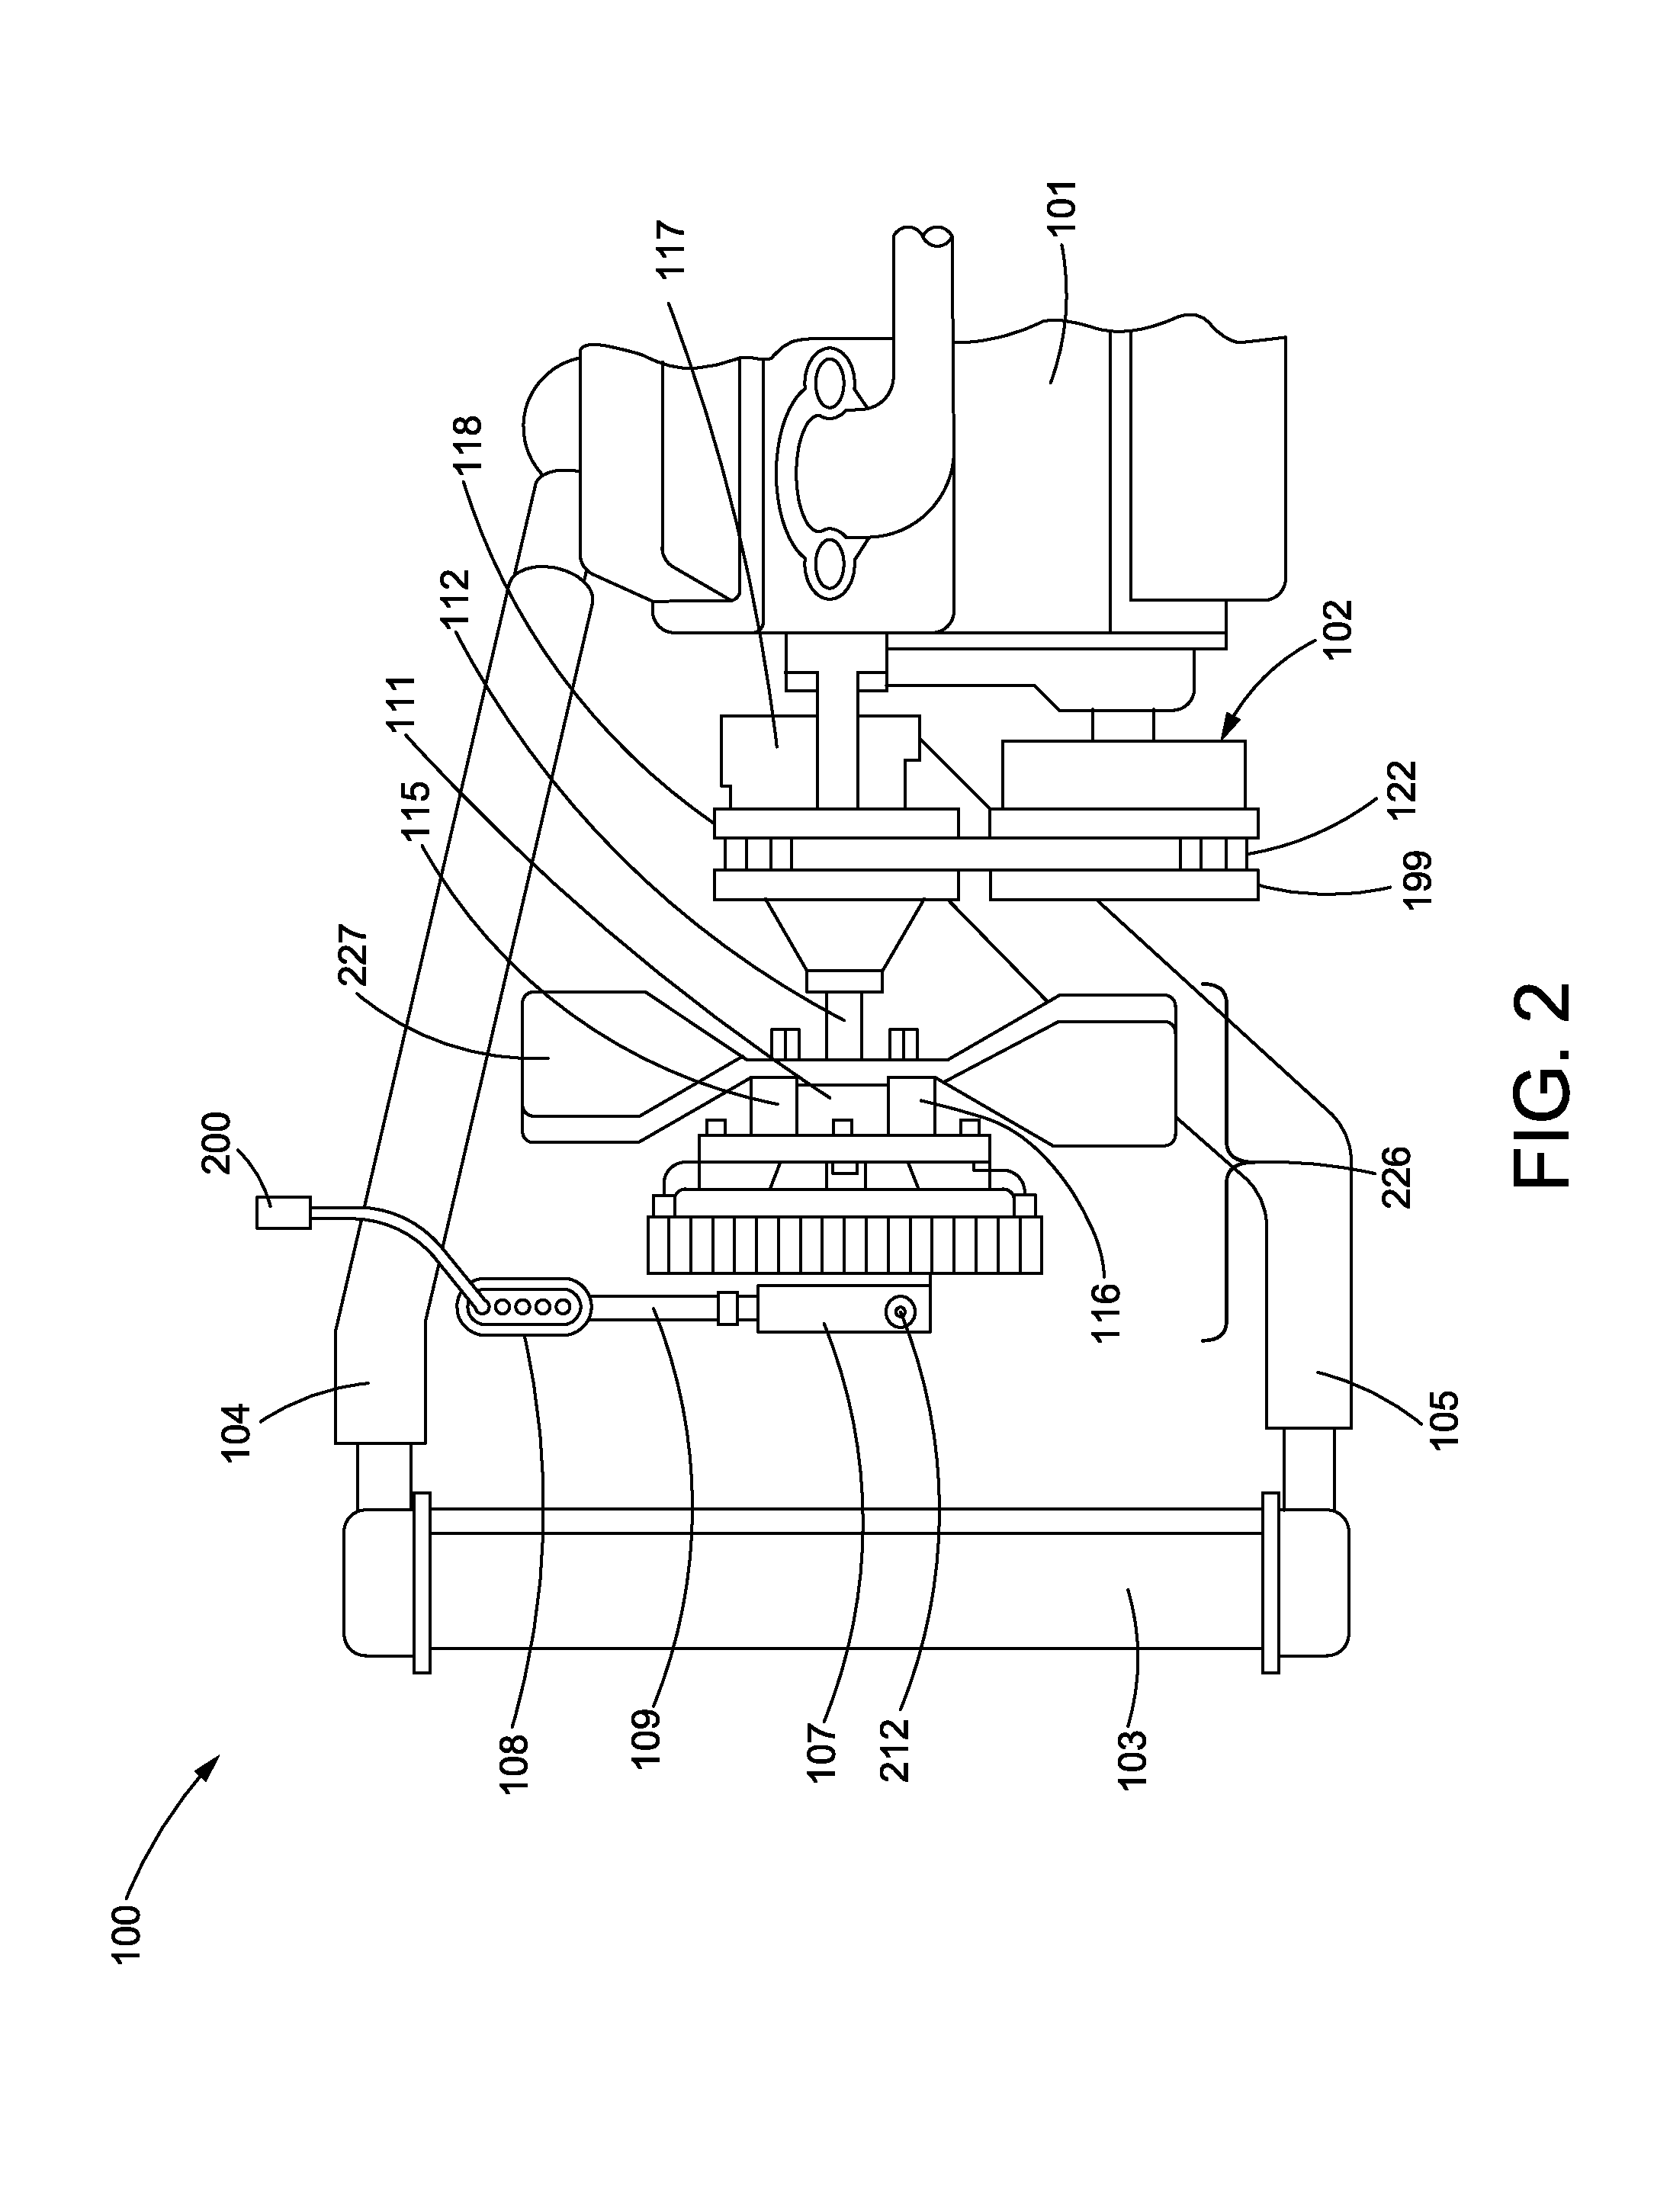 Engine fan control system and method